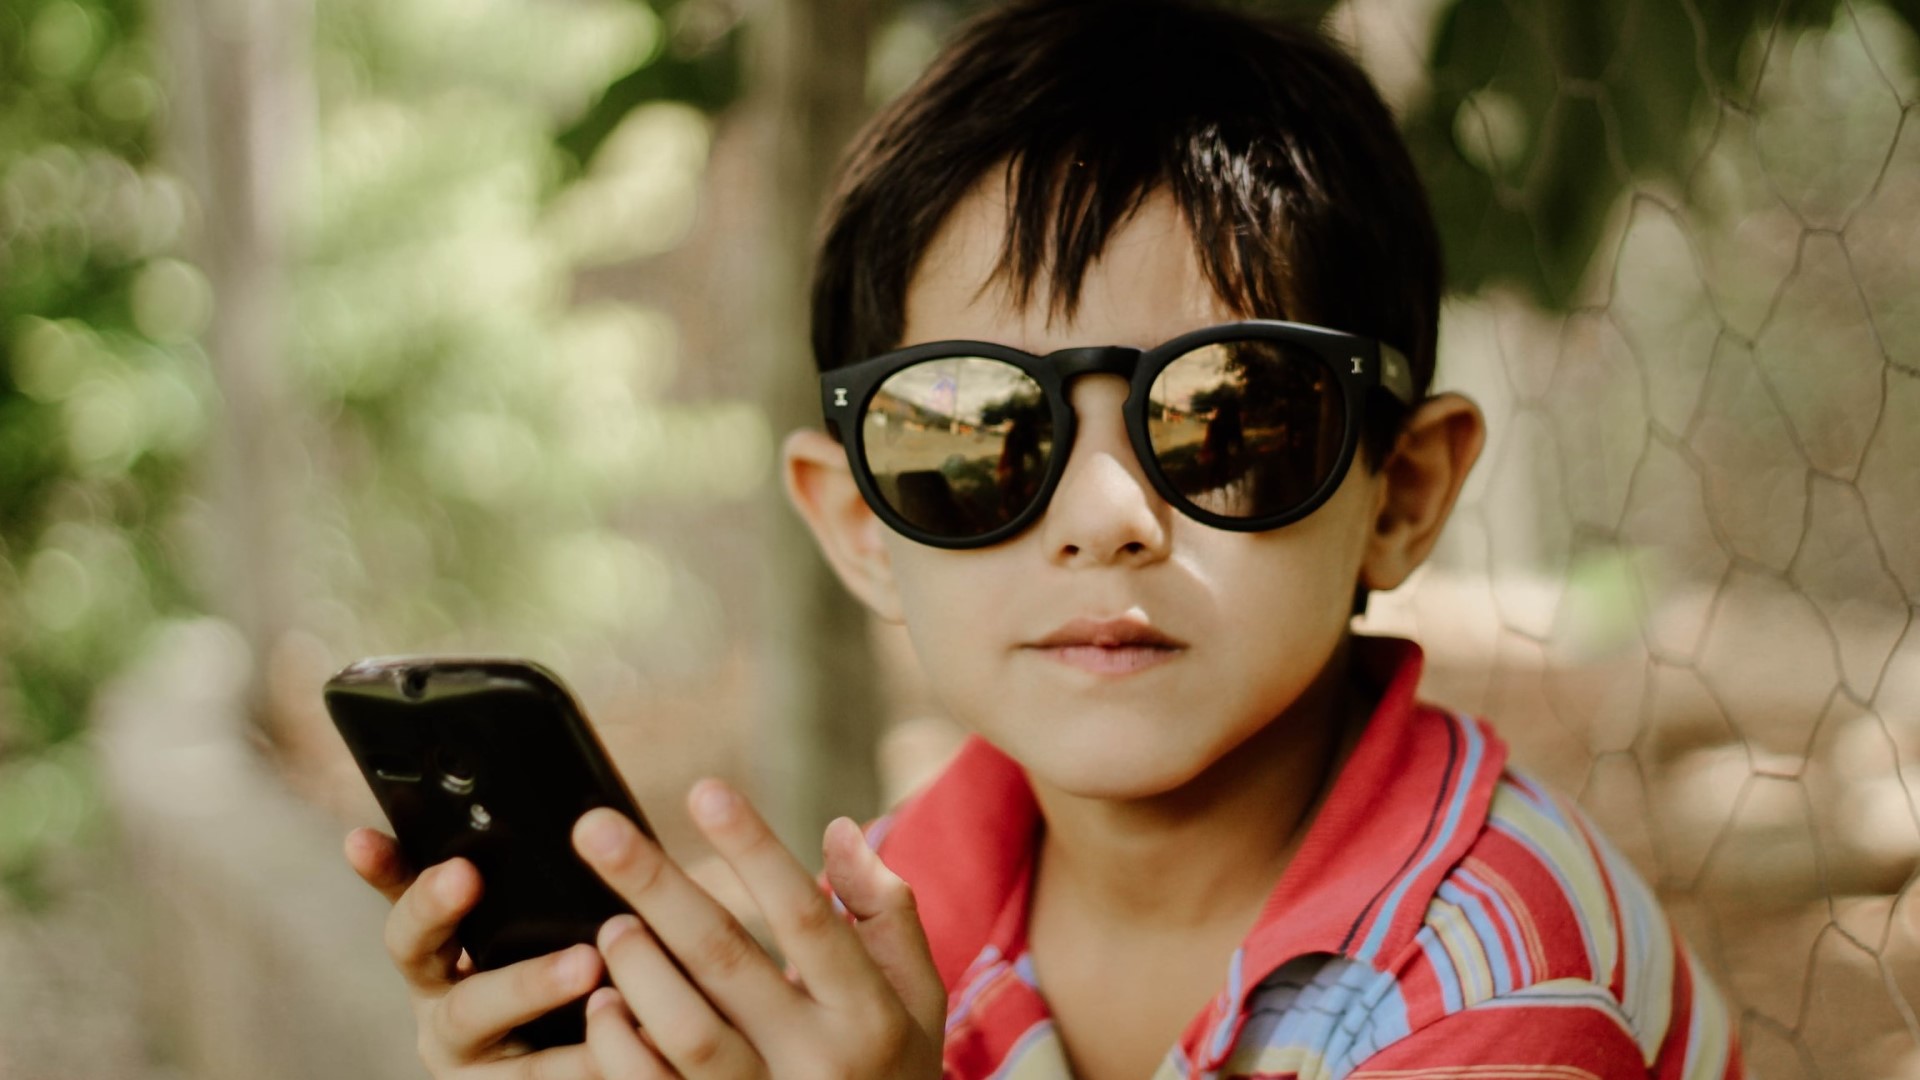 How to Use Parental Controls on Your Child's New Phone - The New